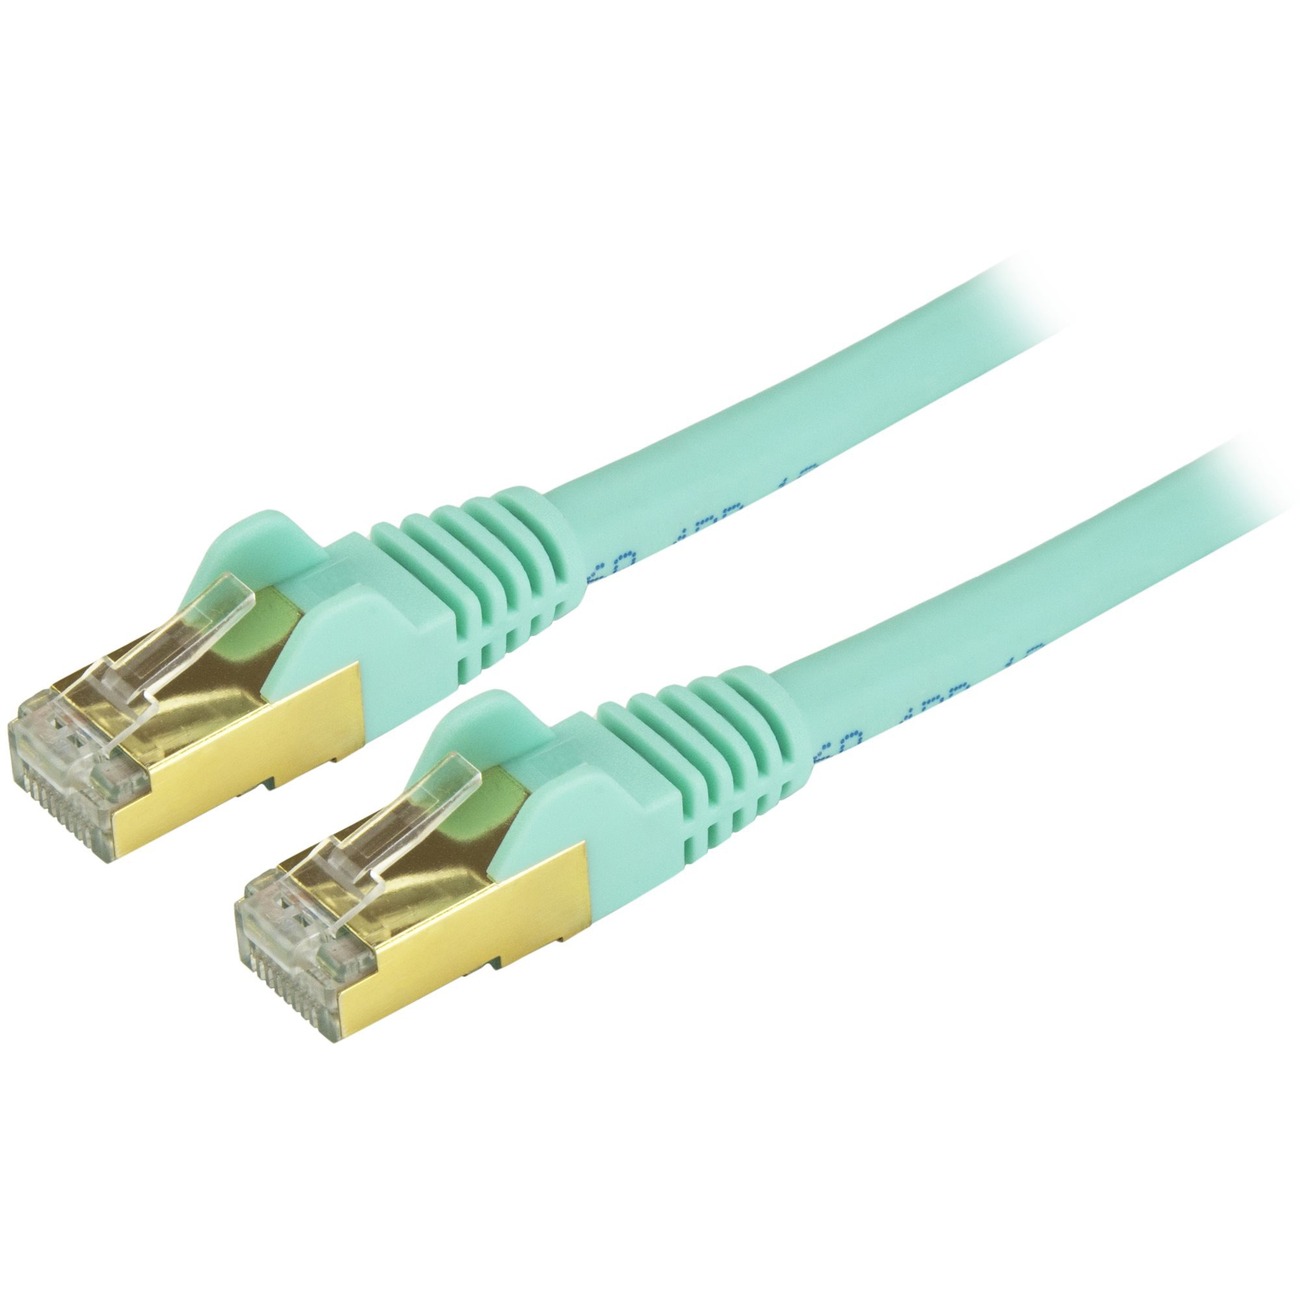 15m CAT6 Ethernet Cable - LSZH (Low Smoke Zero Halogen) - 10 Gigabit 650MHz  100W PoE RJ45 10GbE UTP Network Patch Cord Snagless with Strain Relief 